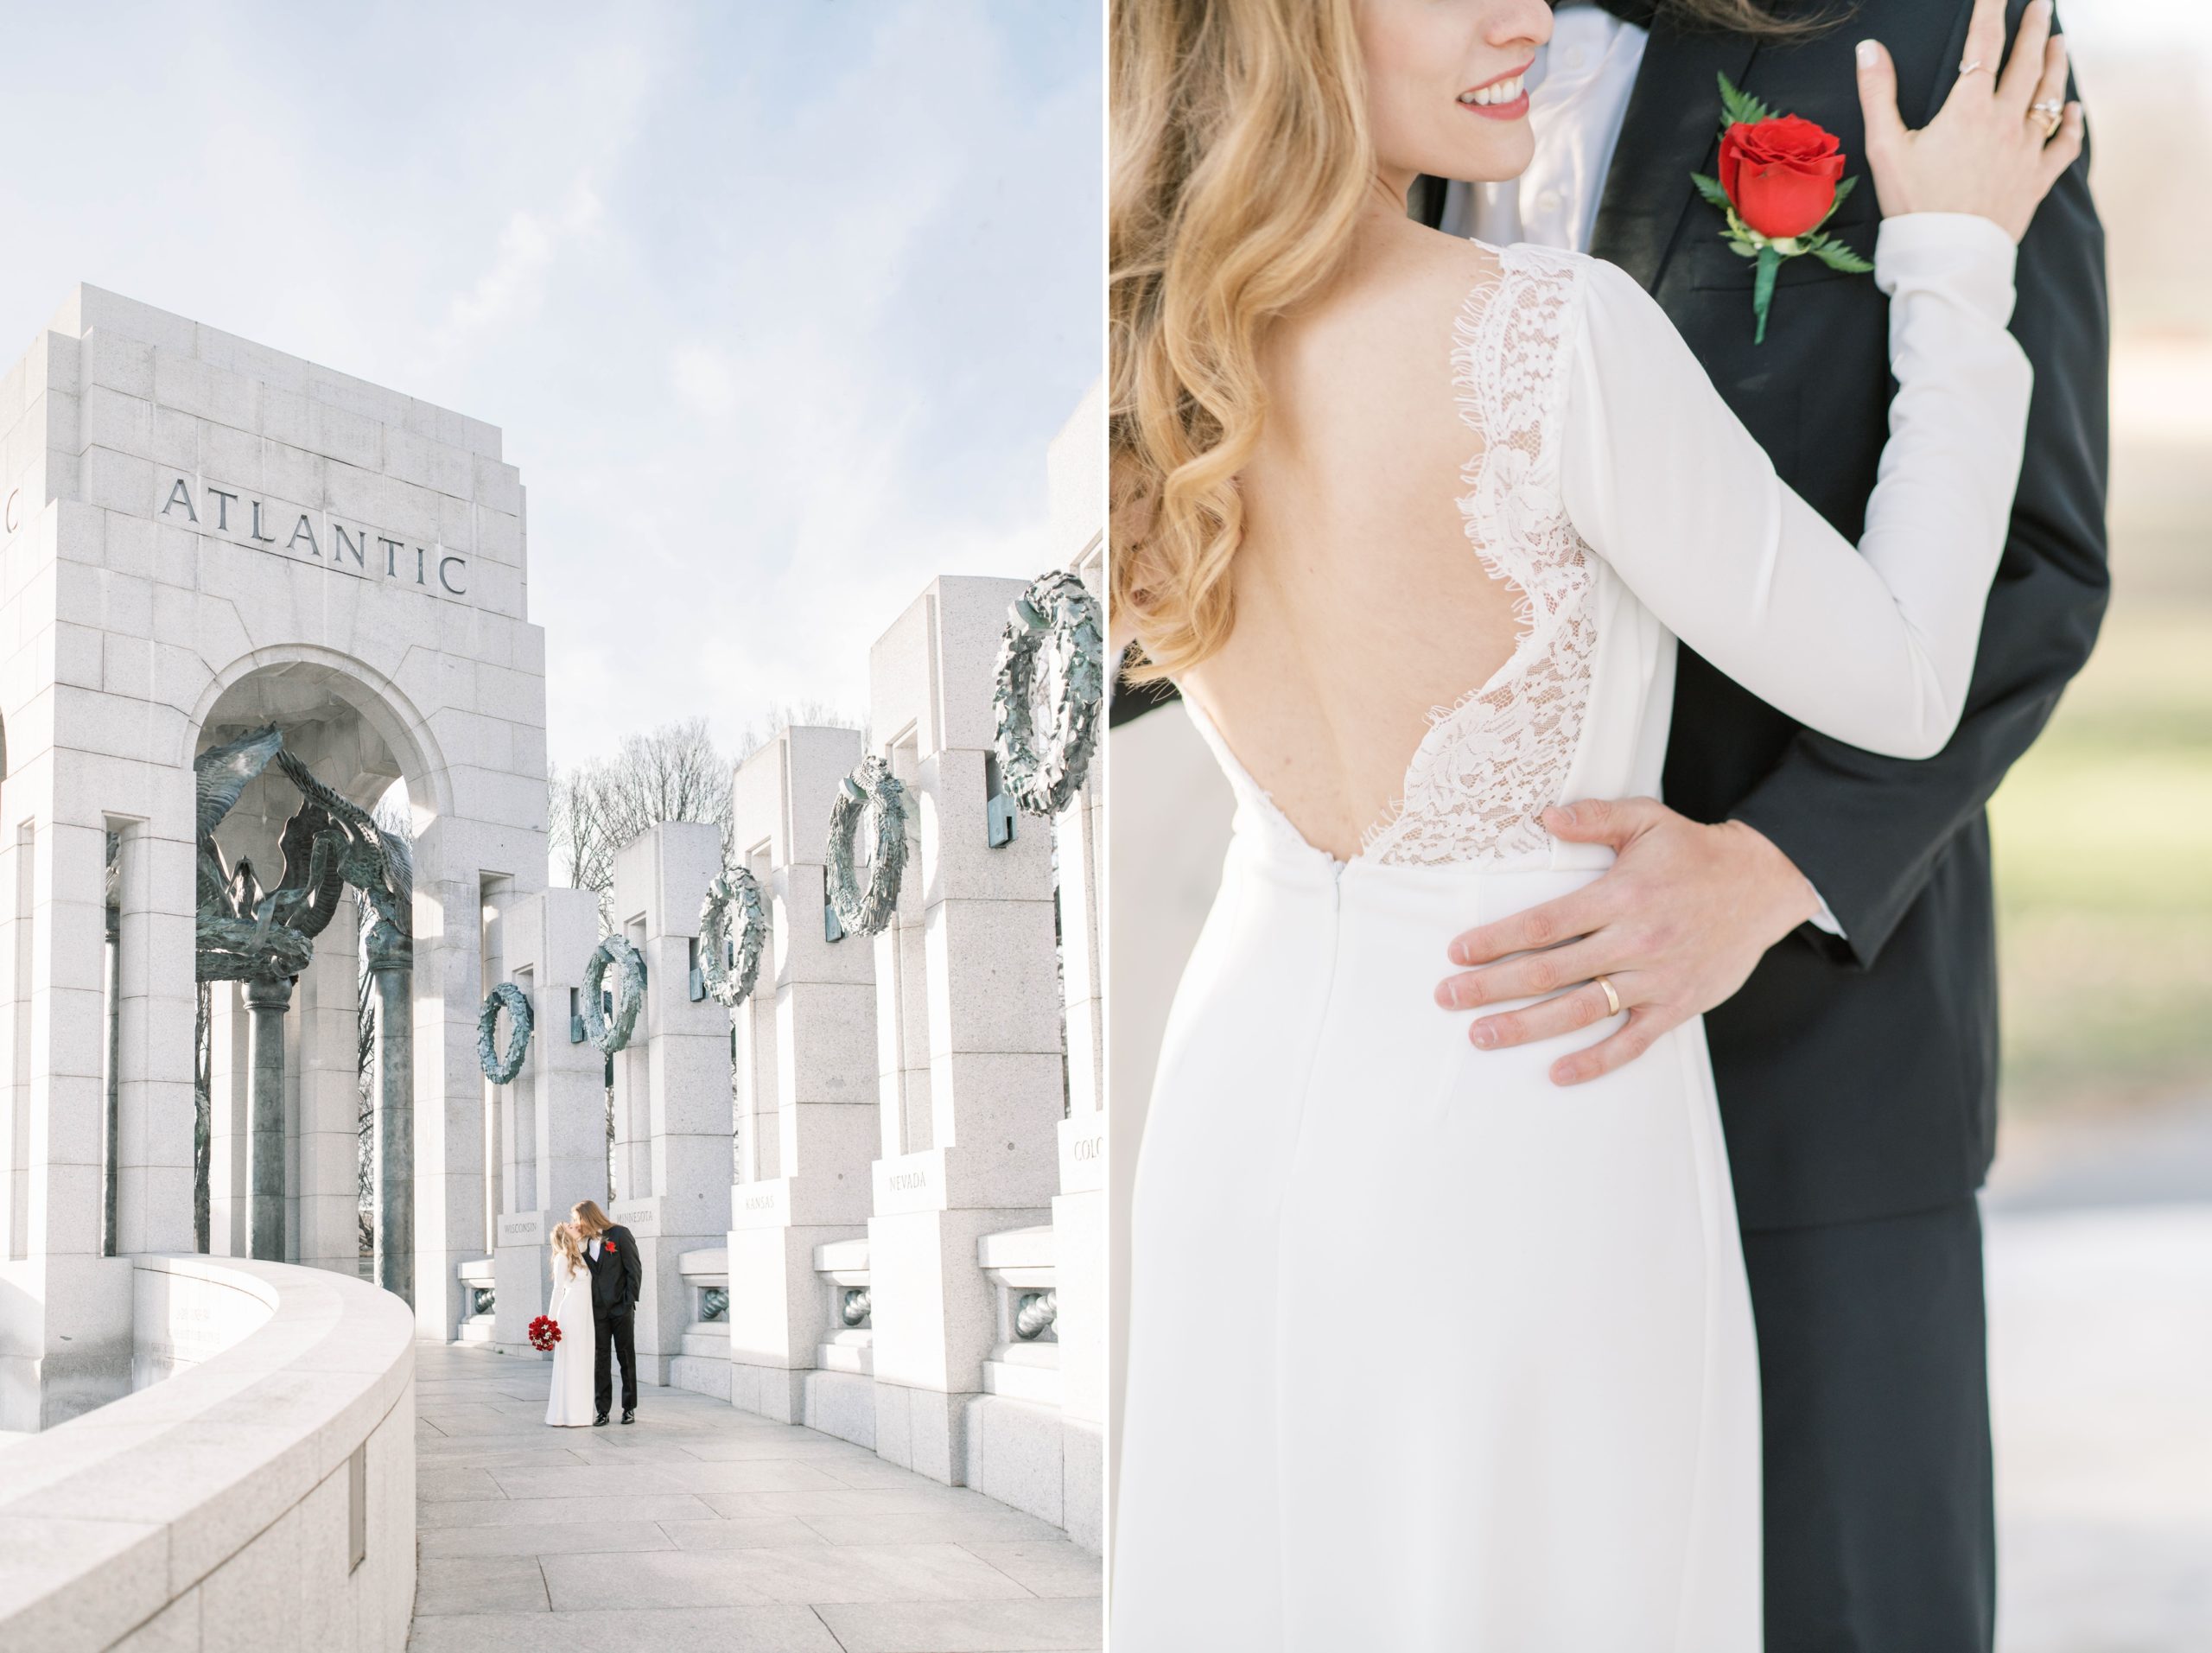 A romantic elopement at the DC War Memorial in Washington, DC on Valentine's Day.